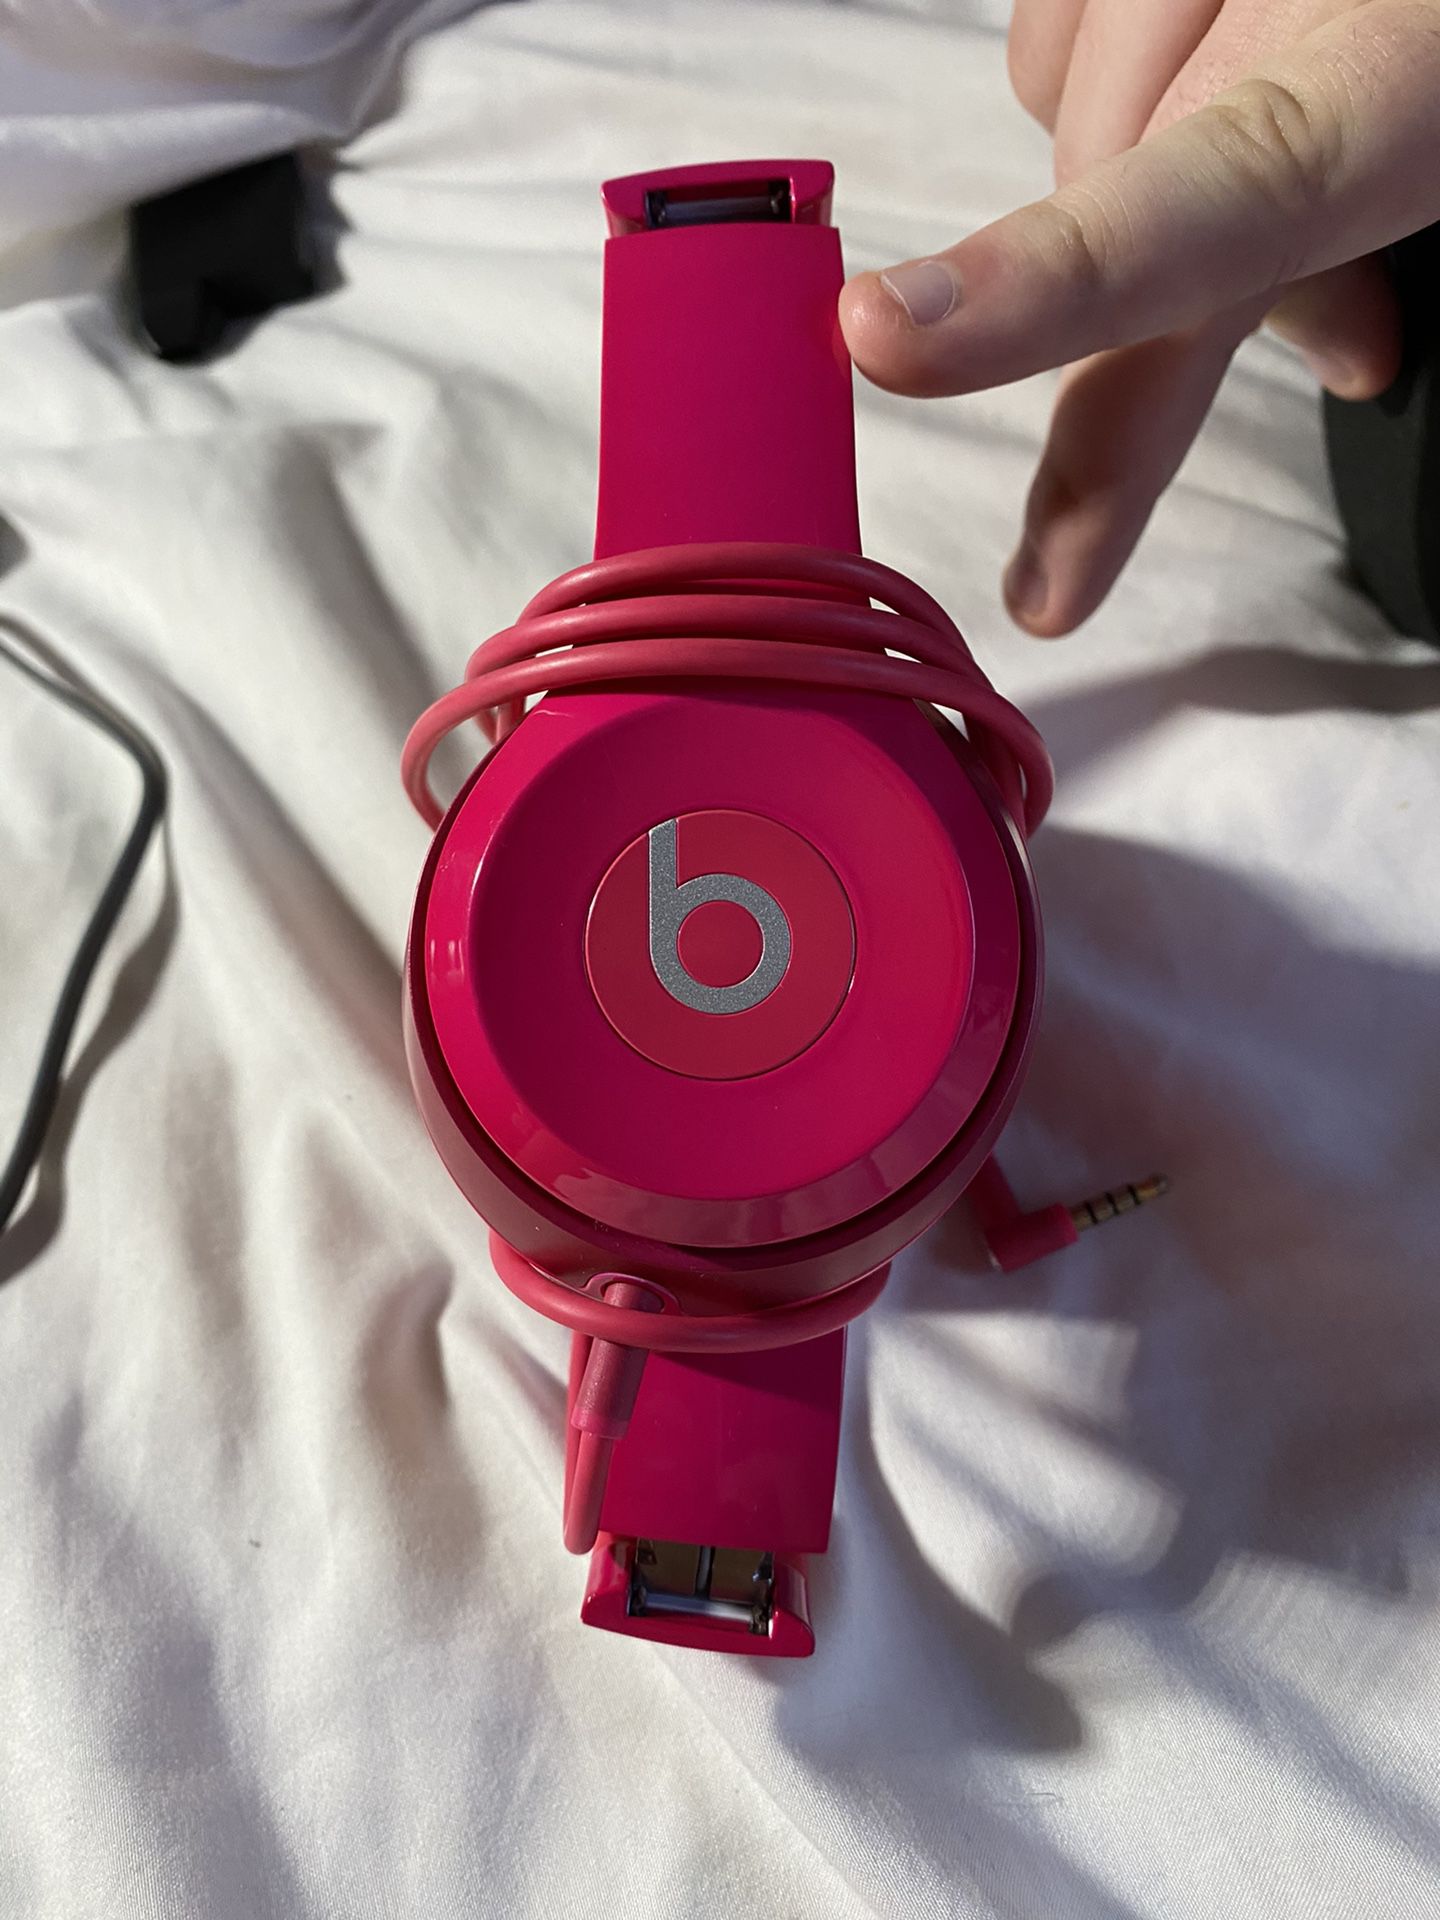 Hot pink solo 2 beats by Dr. Dre